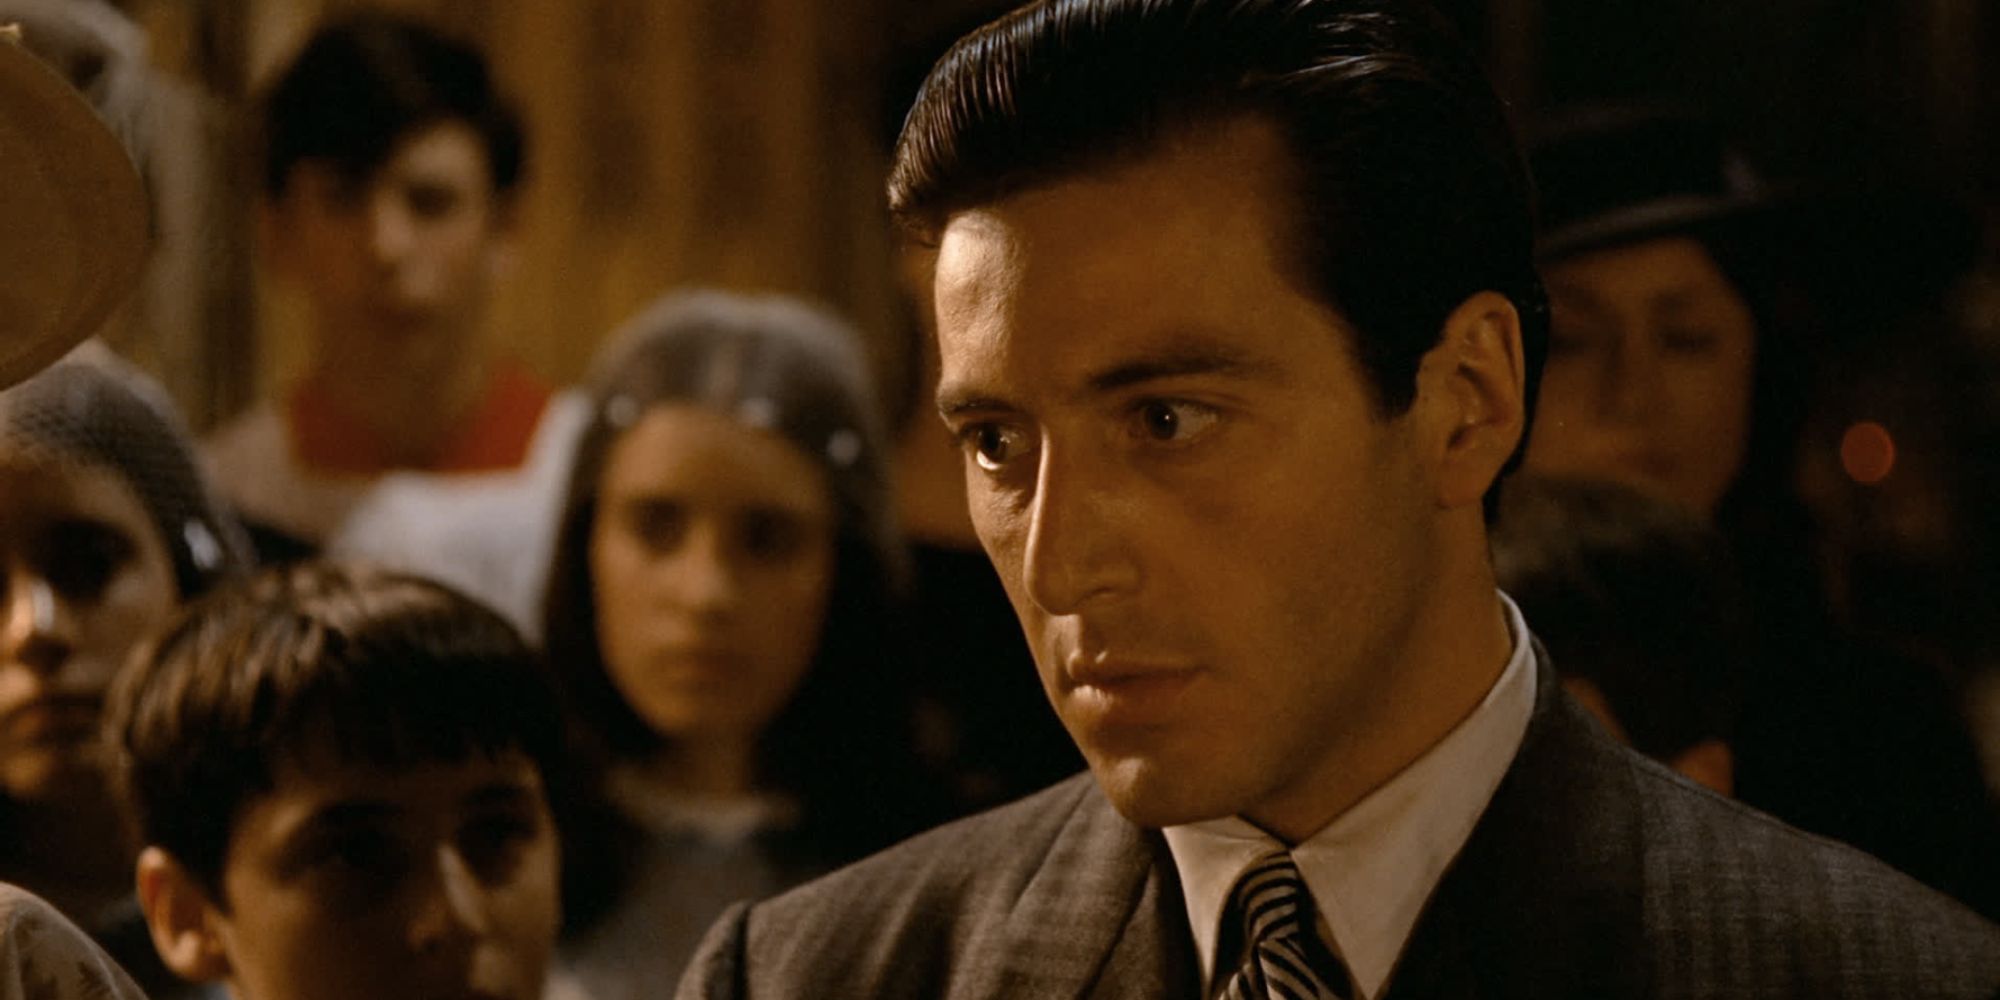 Michalel Corleone talking in a brightly lit room in The Godfather